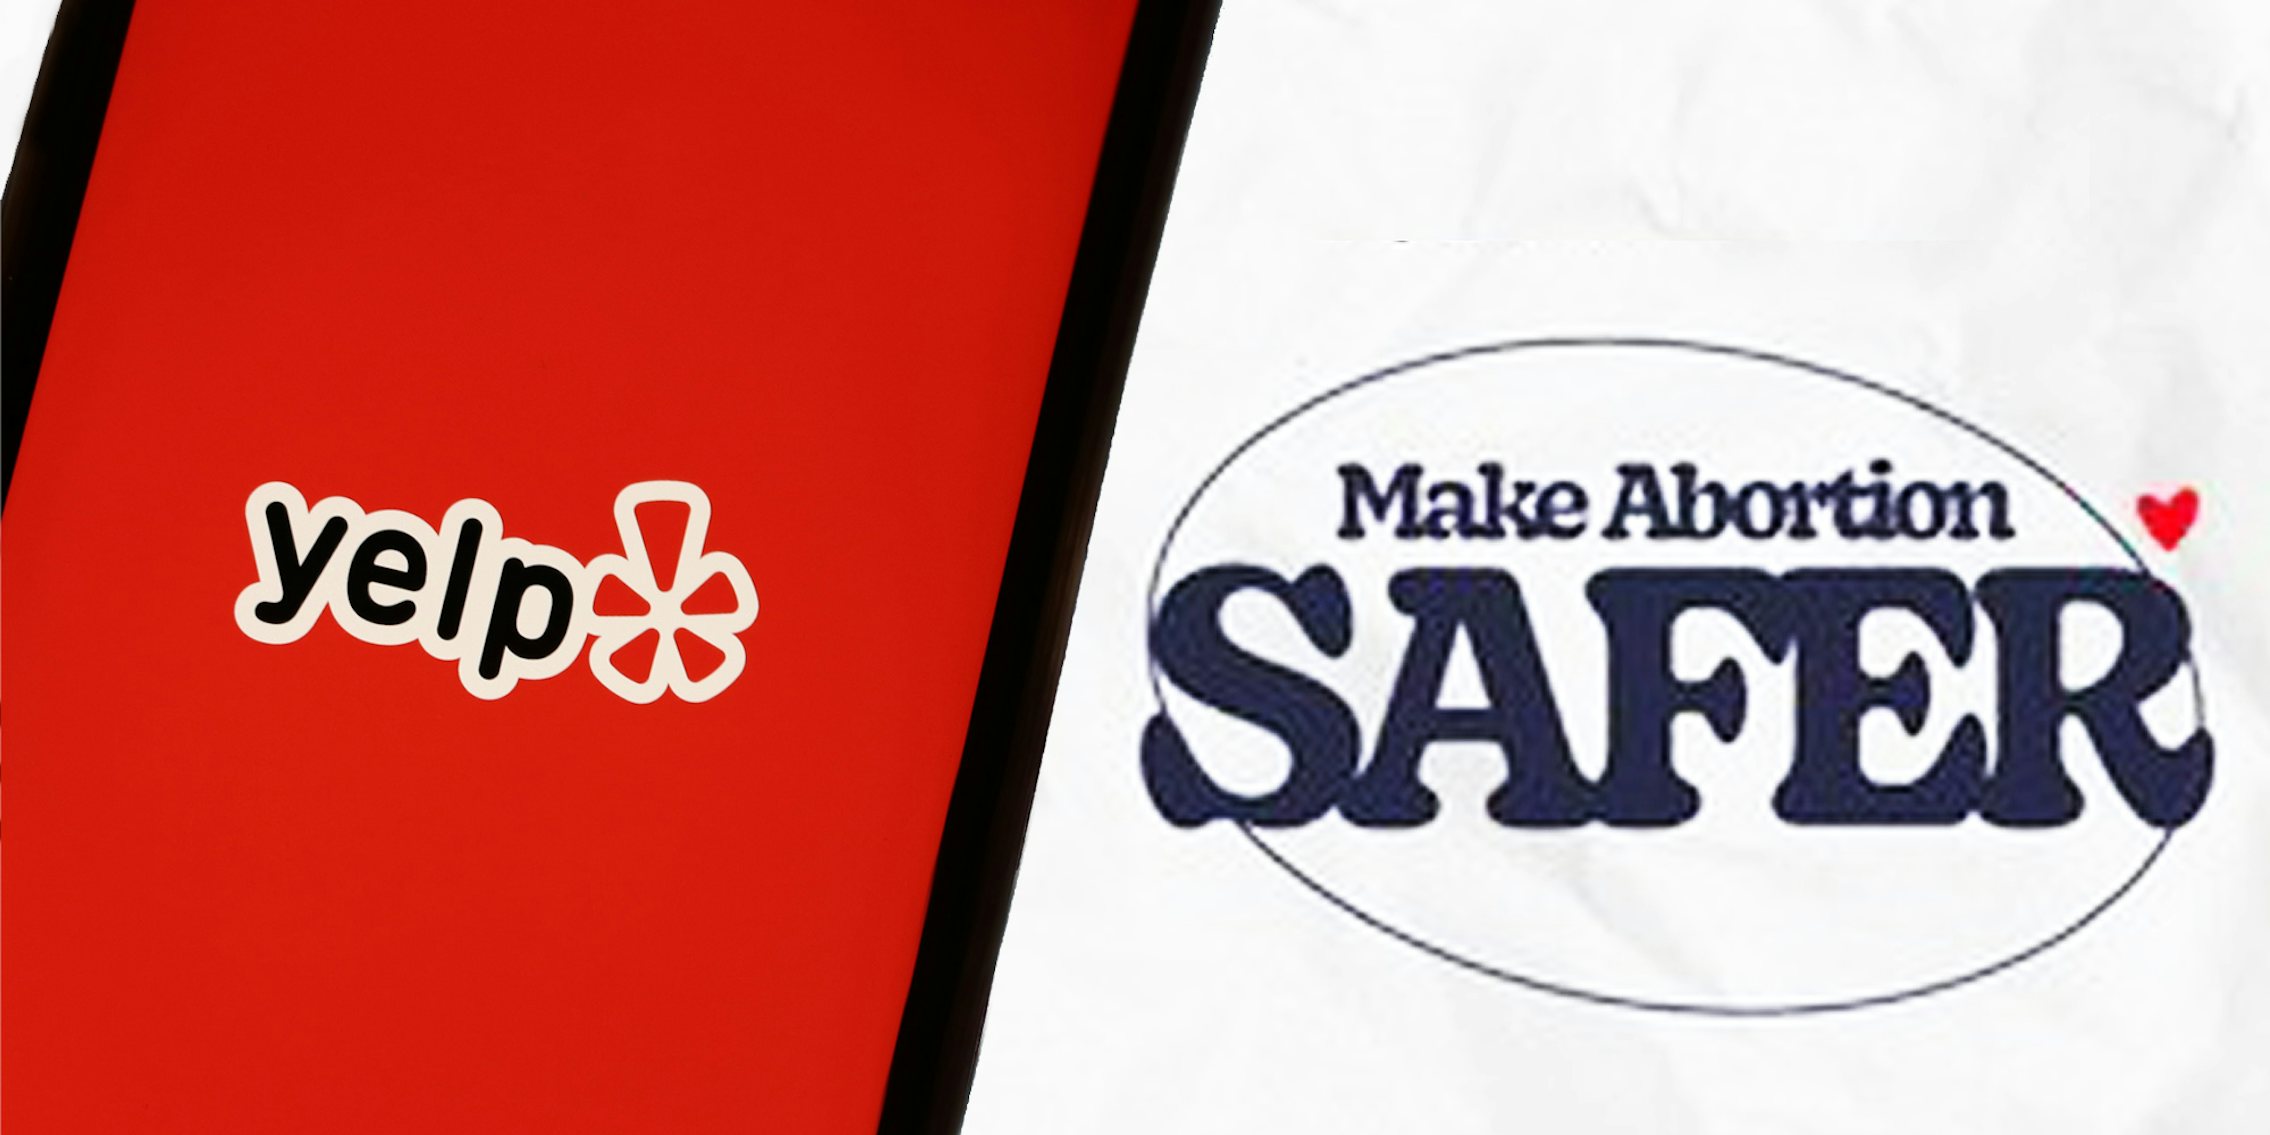 Yelp logo on red phone screen on left 'Make Abortion SAFER' logo on right on white background